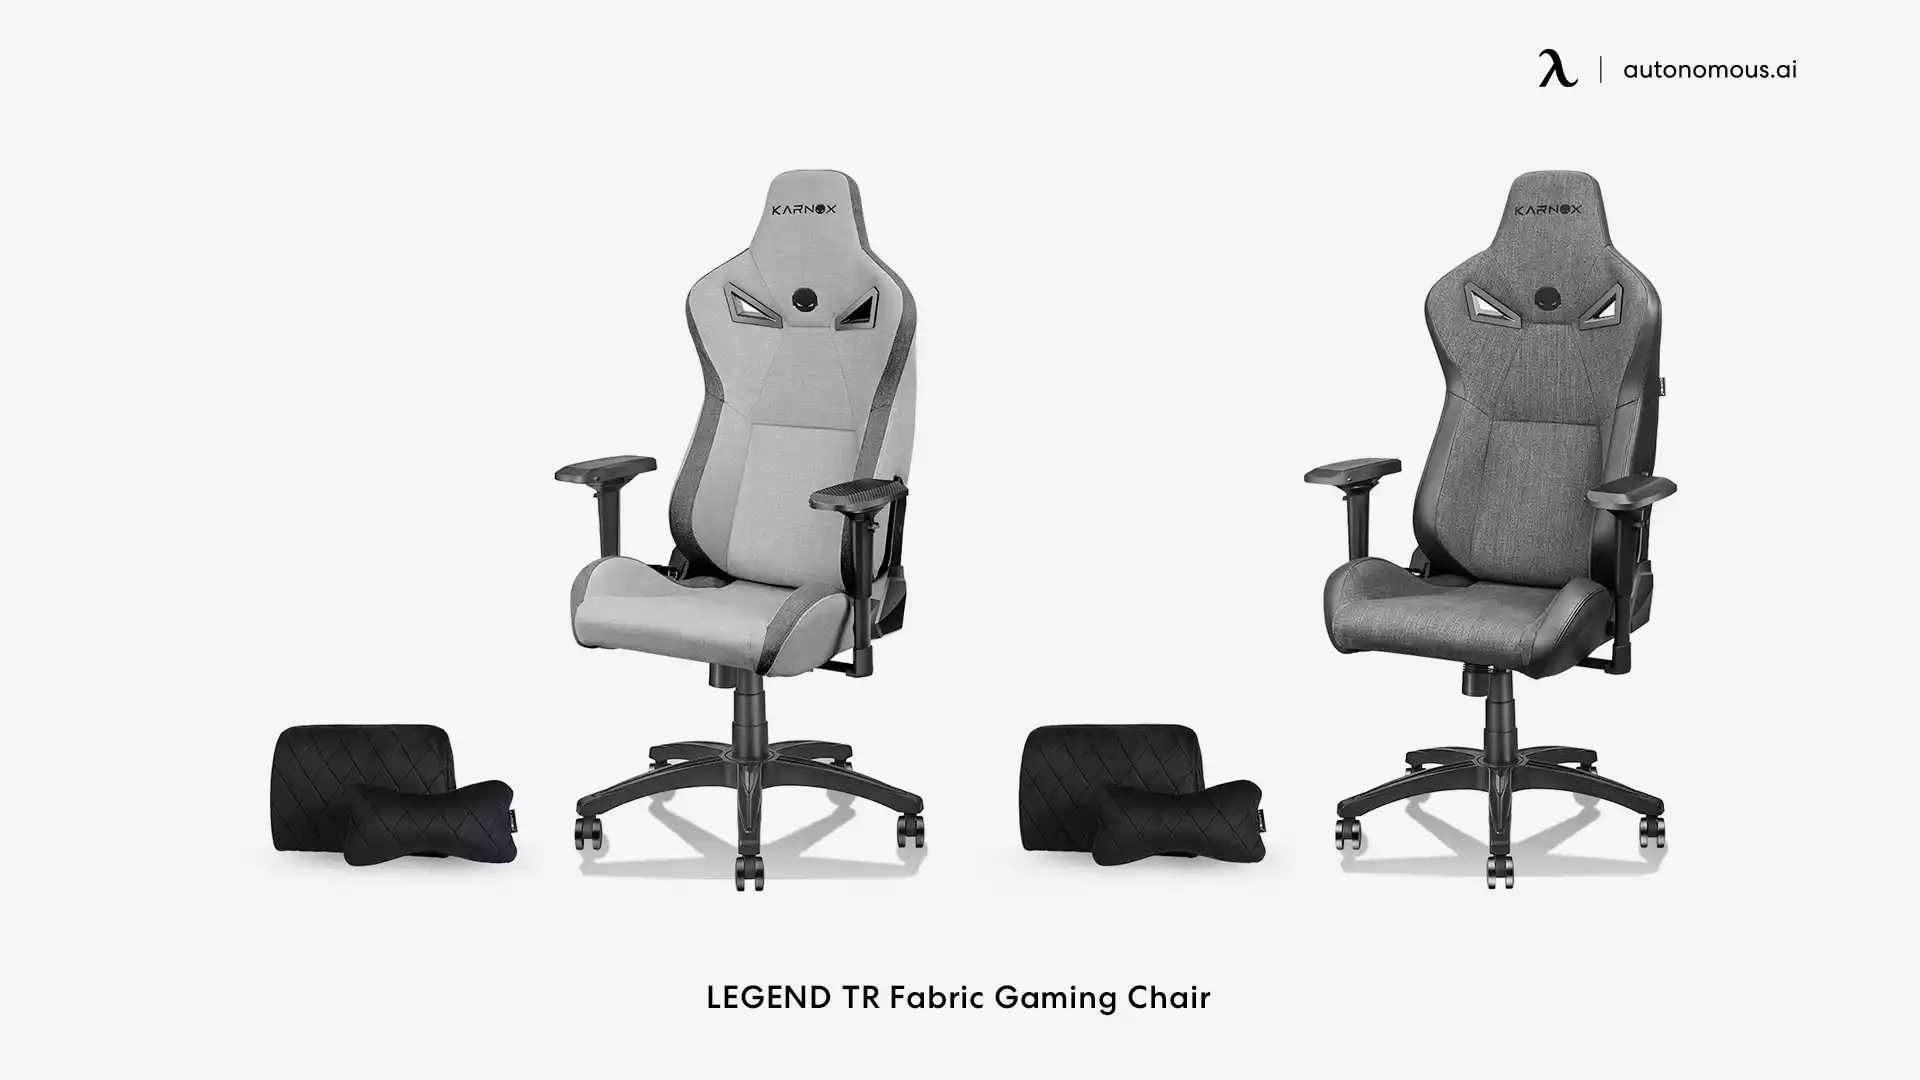 LEGEND TR Fabric Gaming Chair